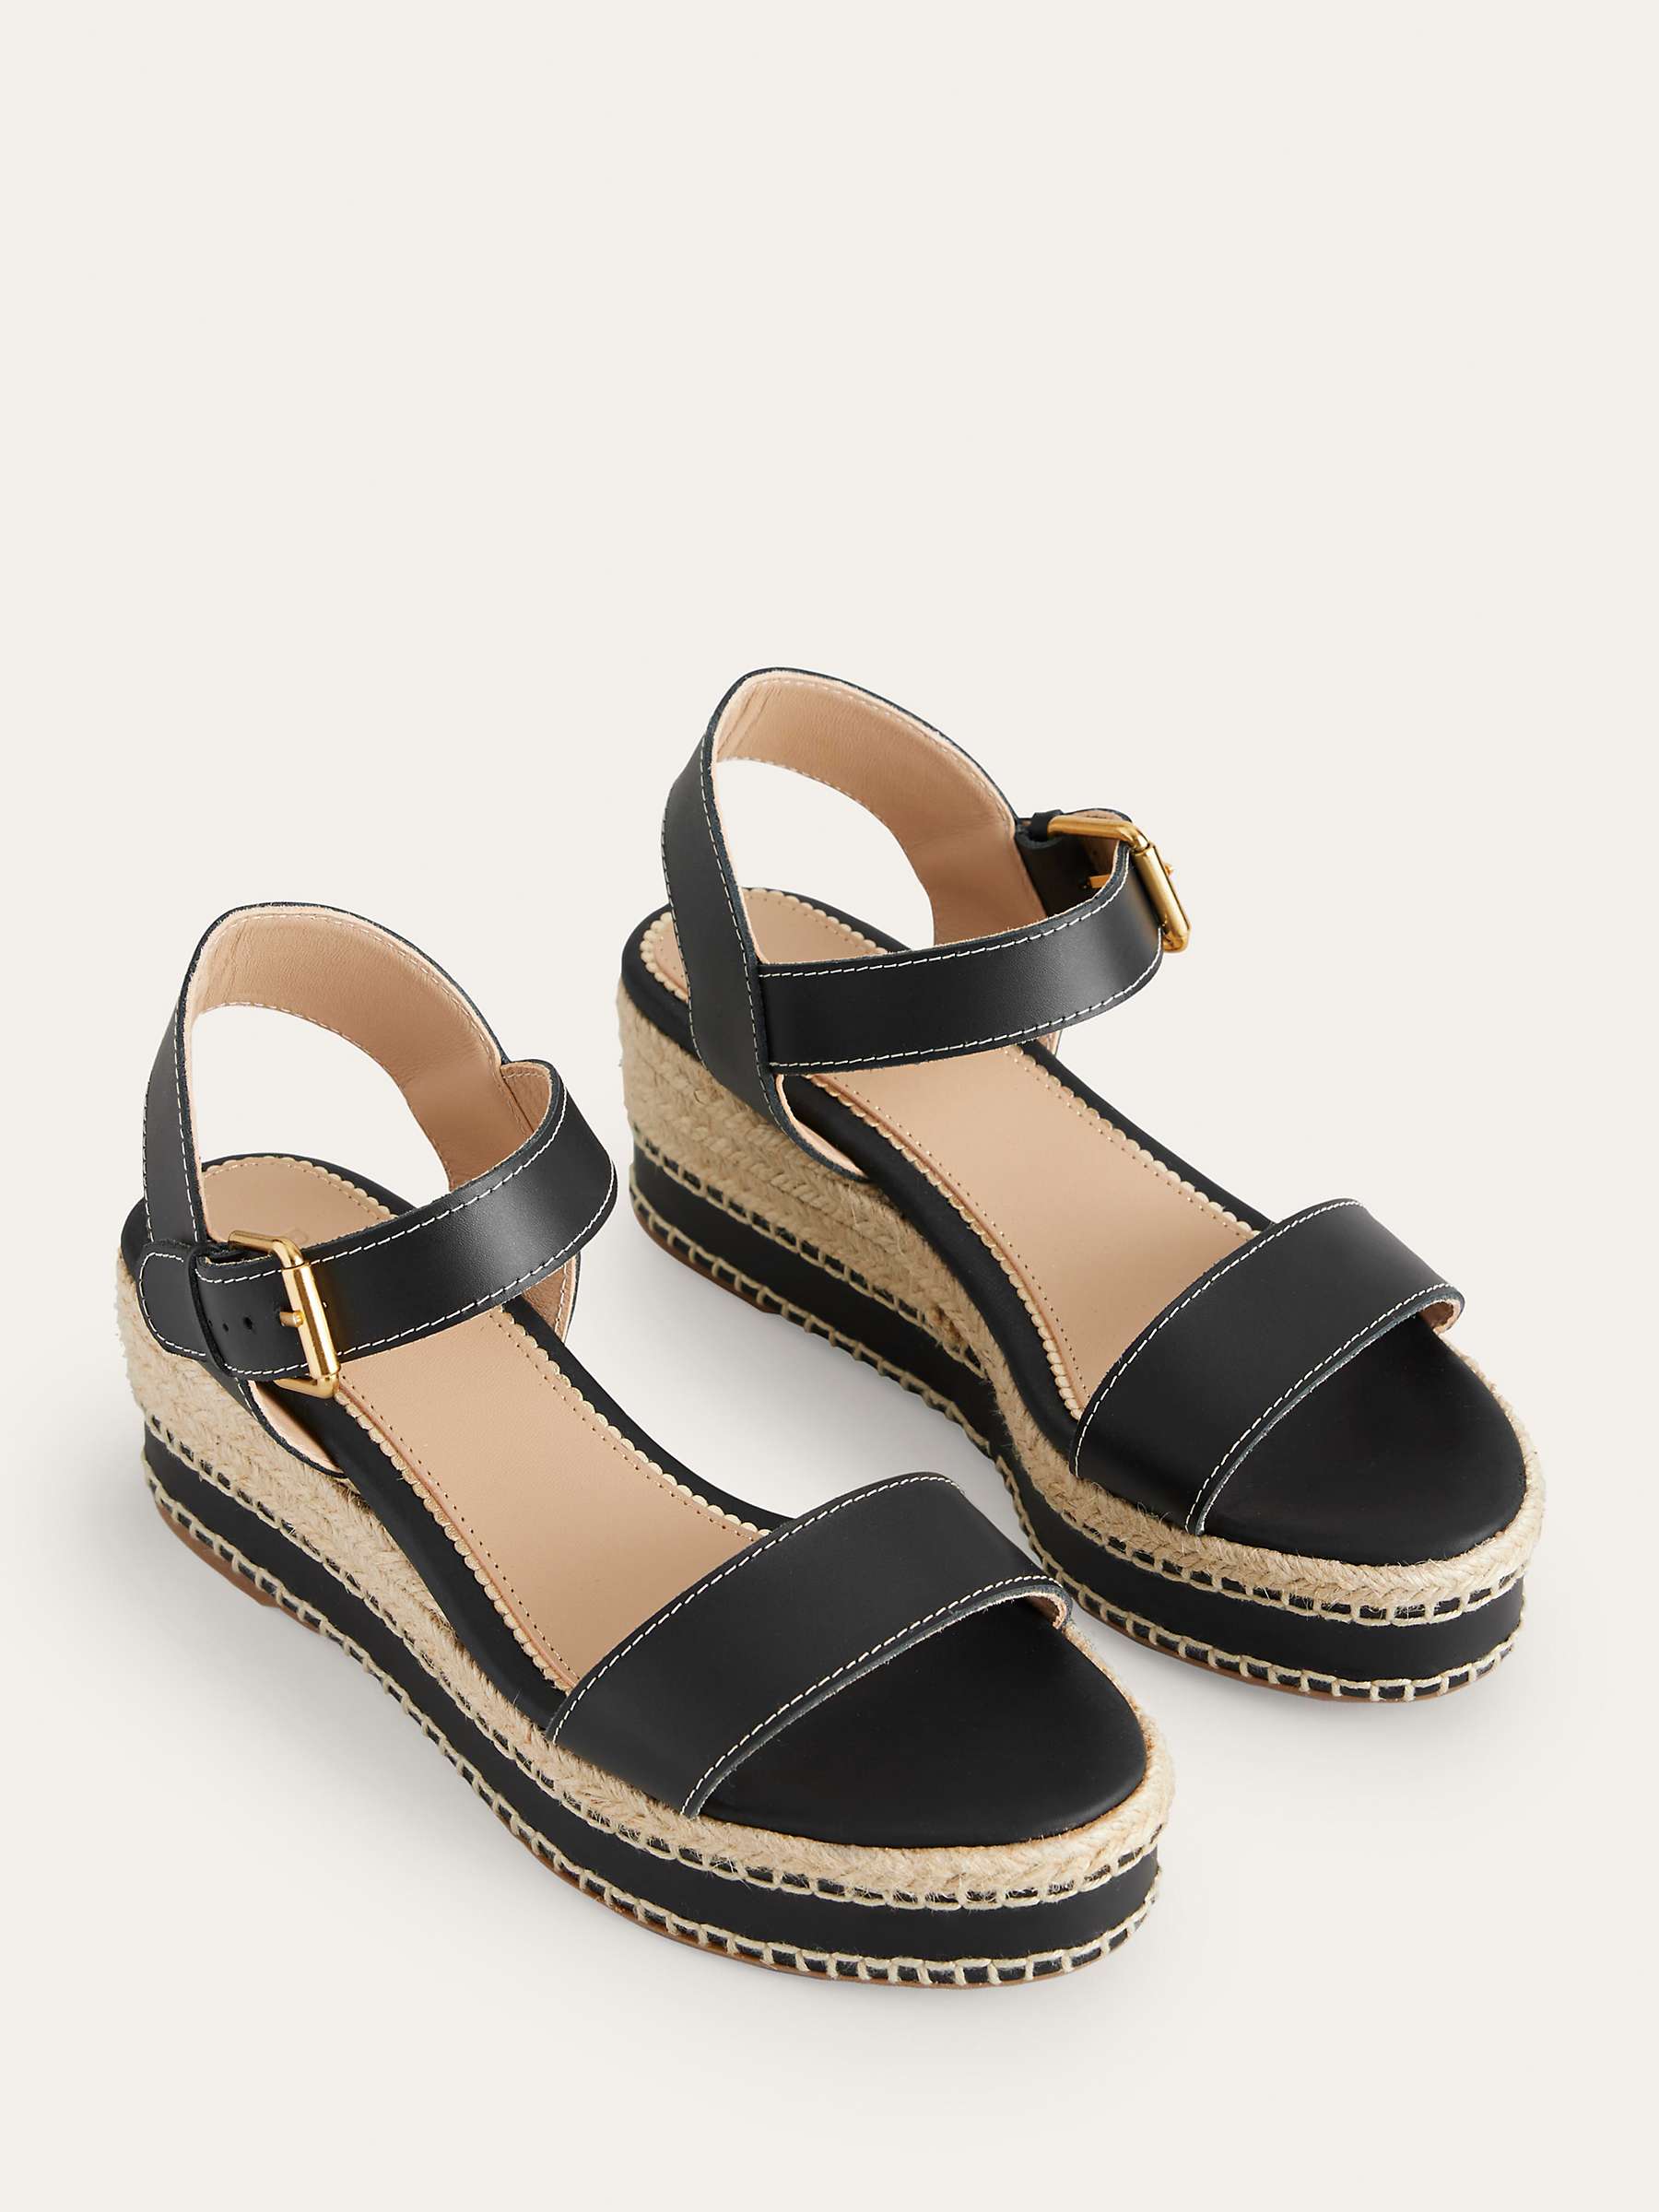 Buy Boden Leather Stitched Wedge Heel Sandals Online at johnlewis.com